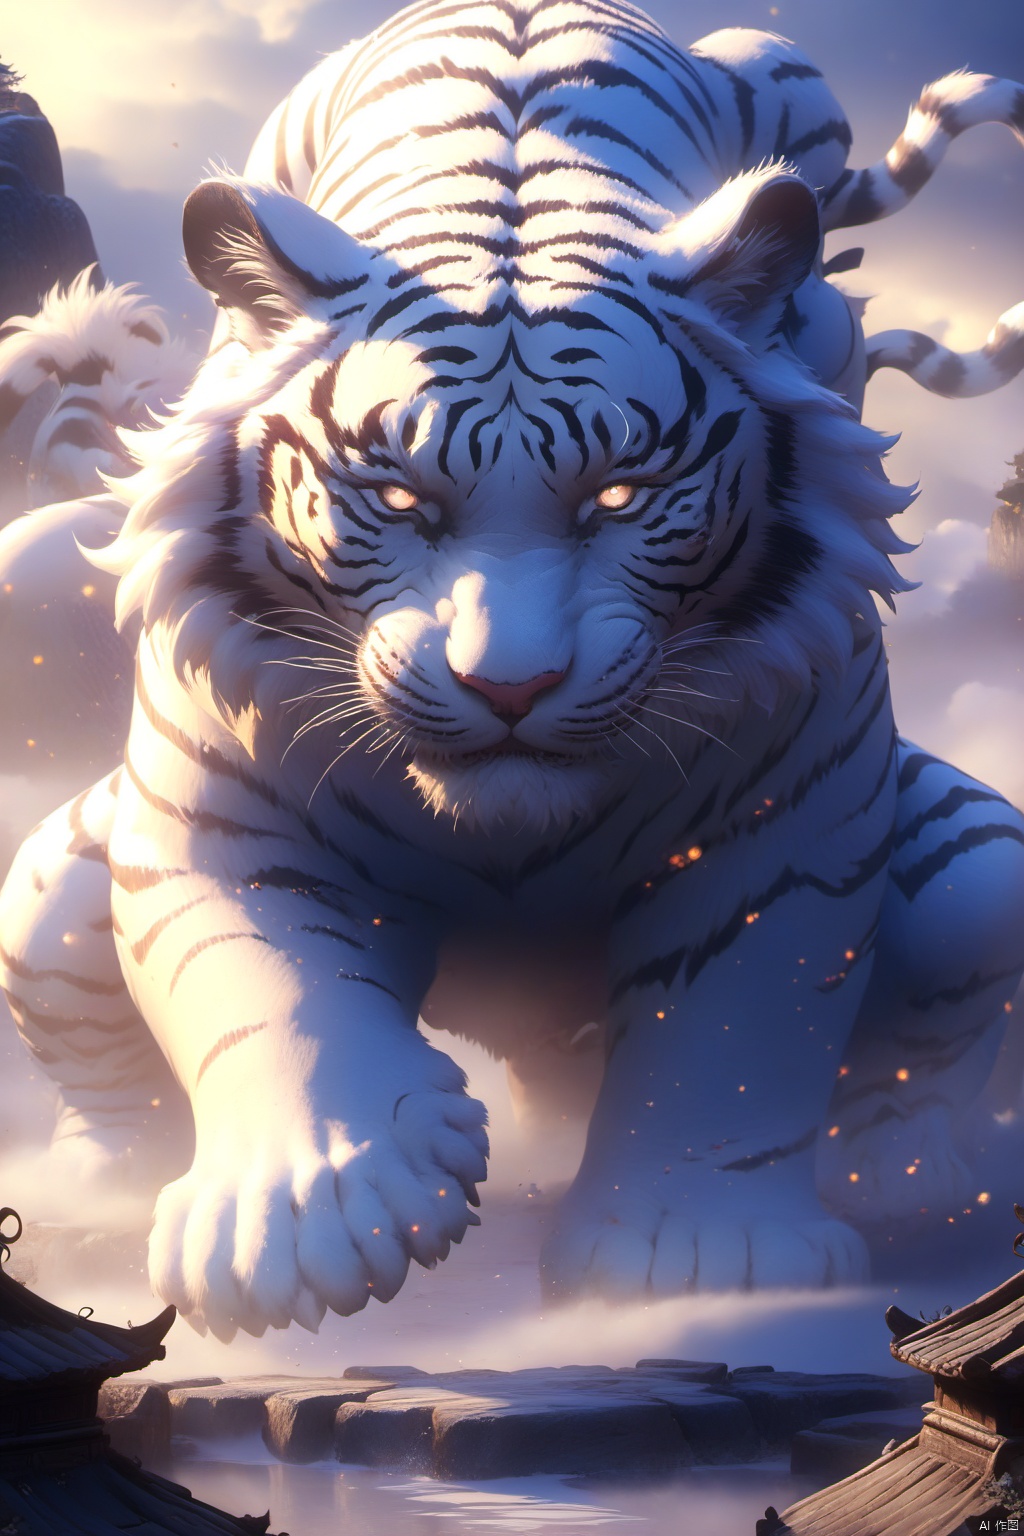  Chinese mythical beast White Tiger